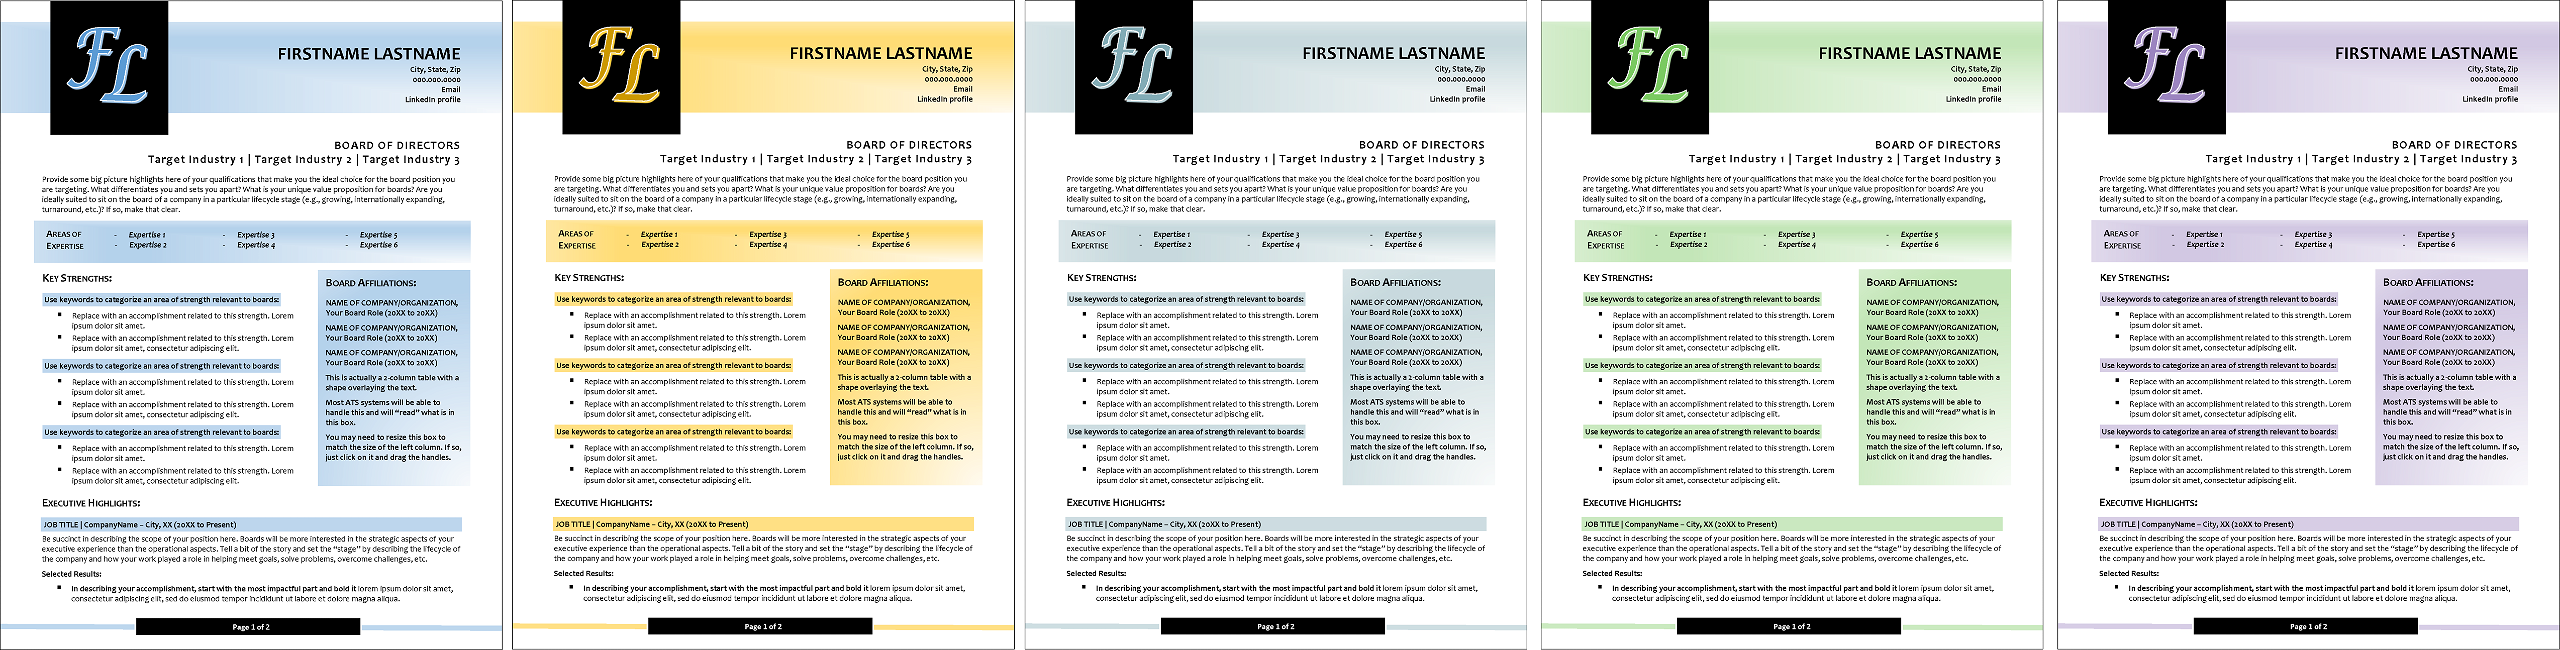 board director resume templates color options